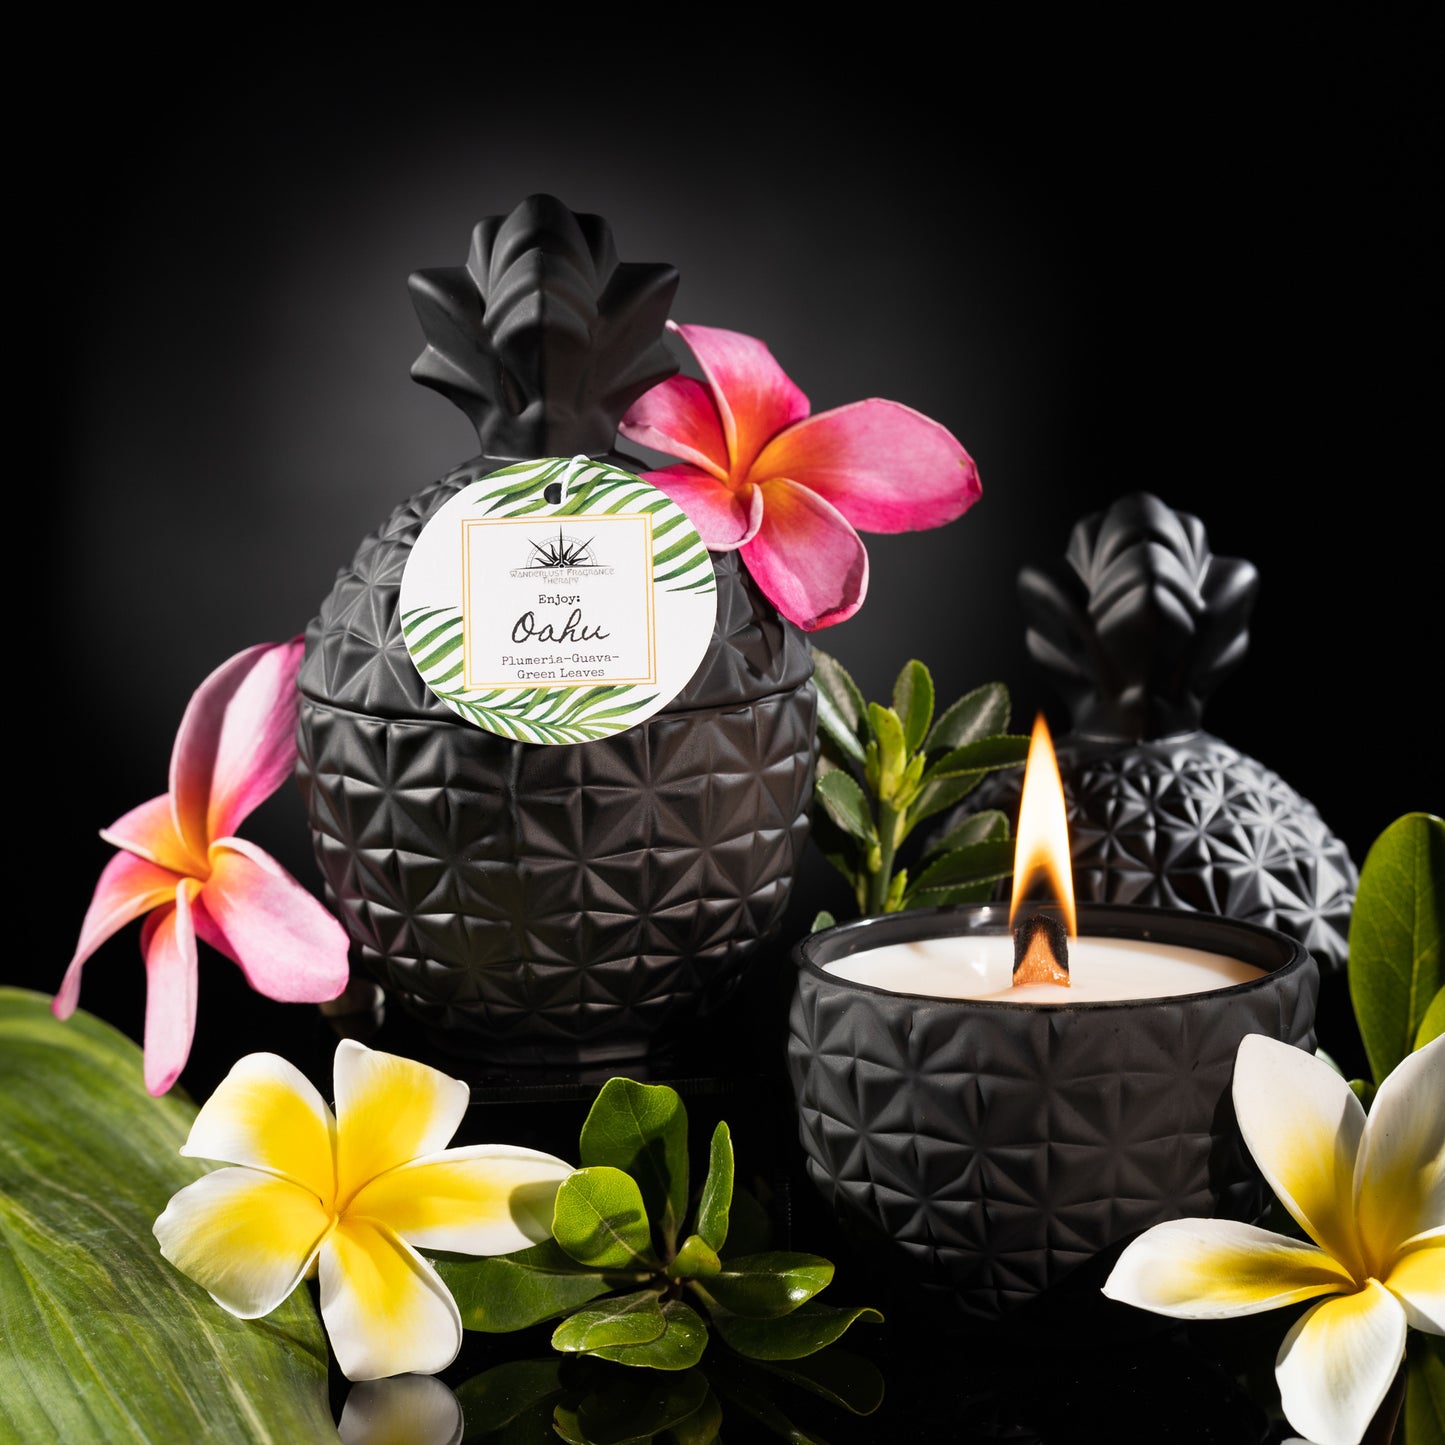 Candle in black pineapple jar scented with plumeria, guava and green leaves